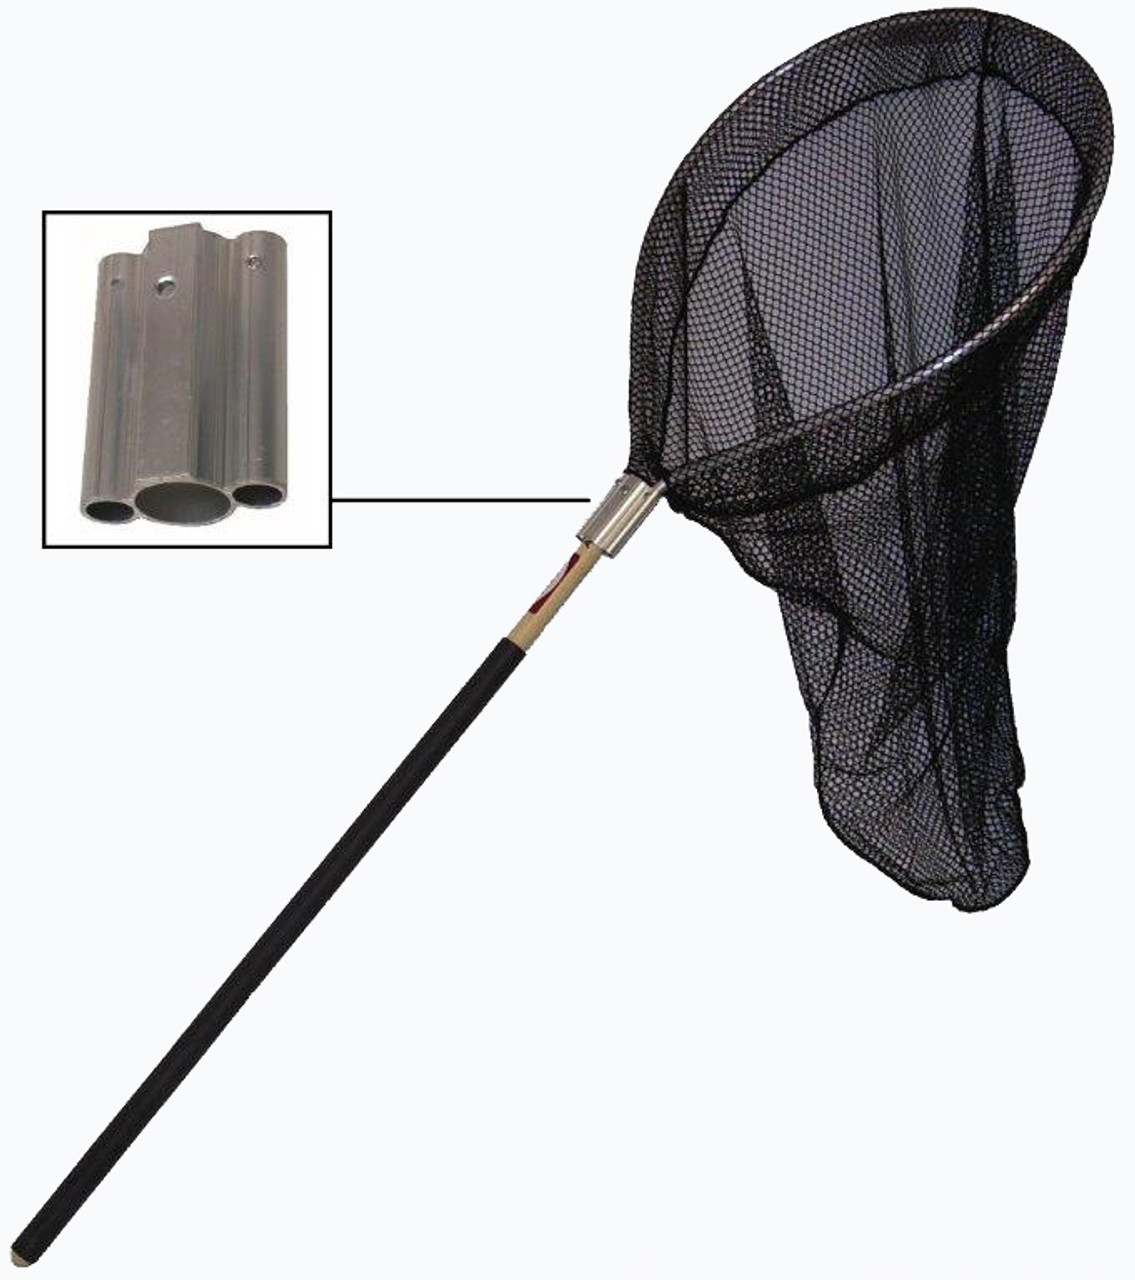 This Heavy Duty Catching Net with 48 handle and 36 net comes equipped  with a heavy-duty wooden handle that will provide years of reliable service.